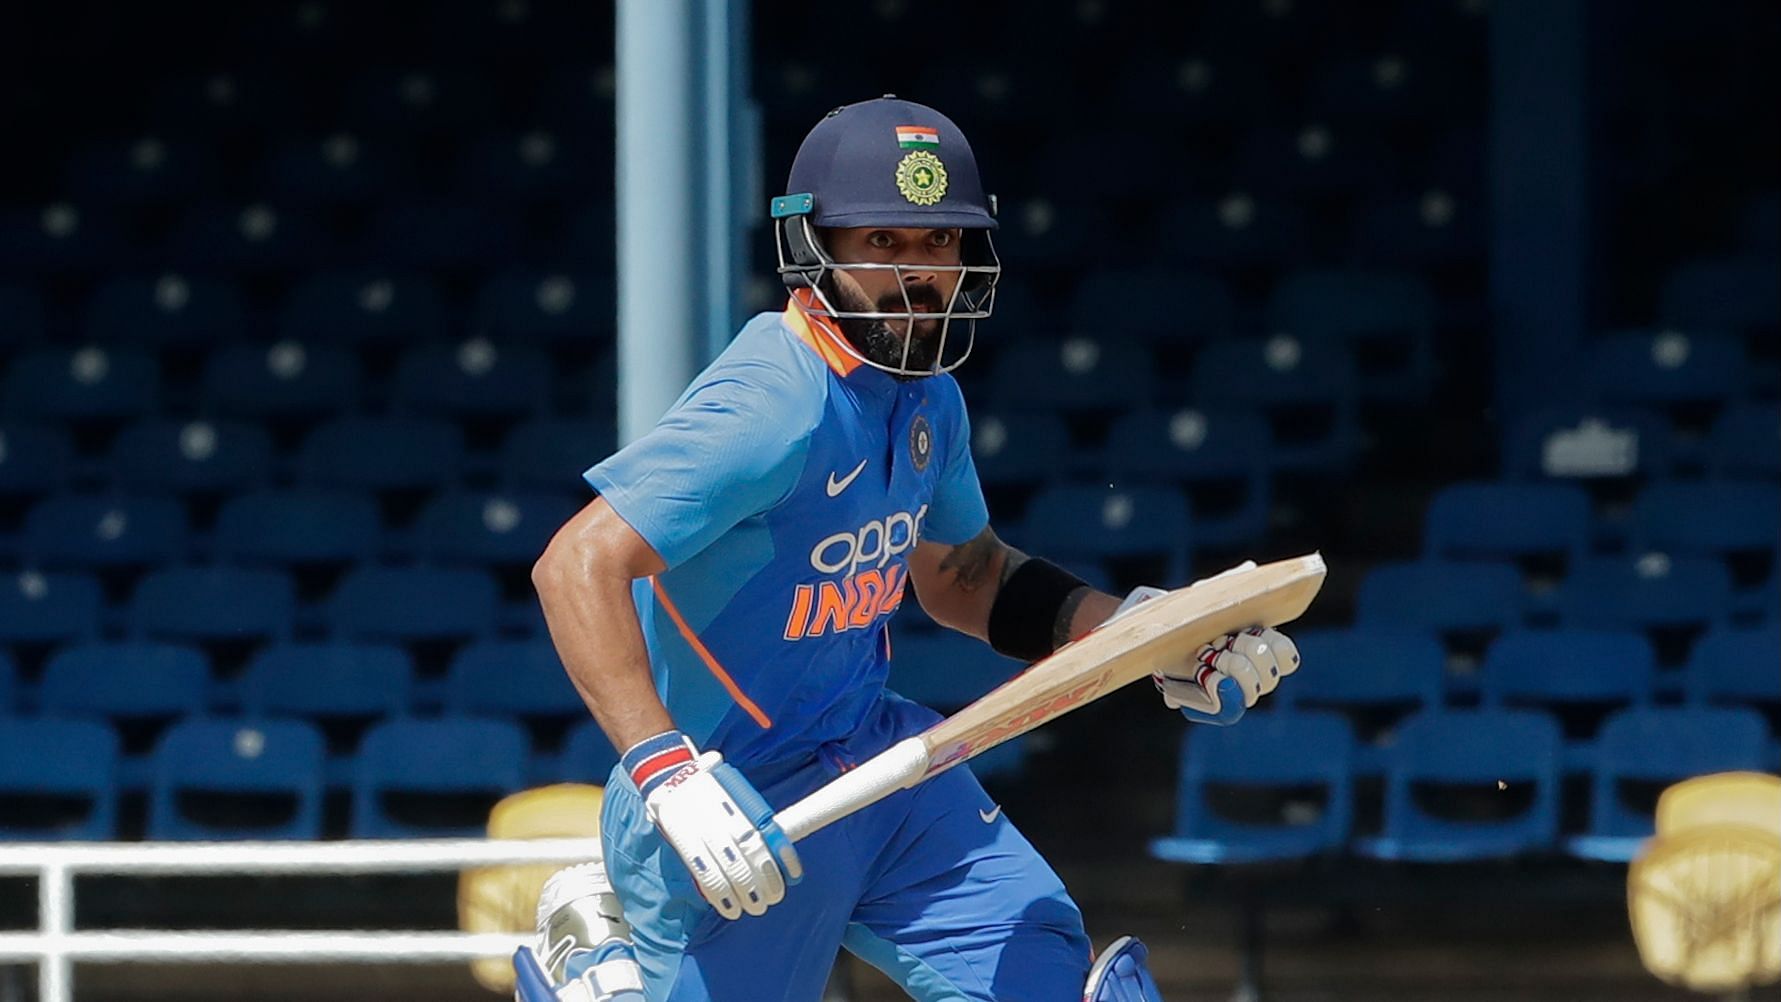 India captain Virat Kohli surpassed Pakistan great Javed Miandad to become the highest run-scorer against the West Indies in ODI cricket.